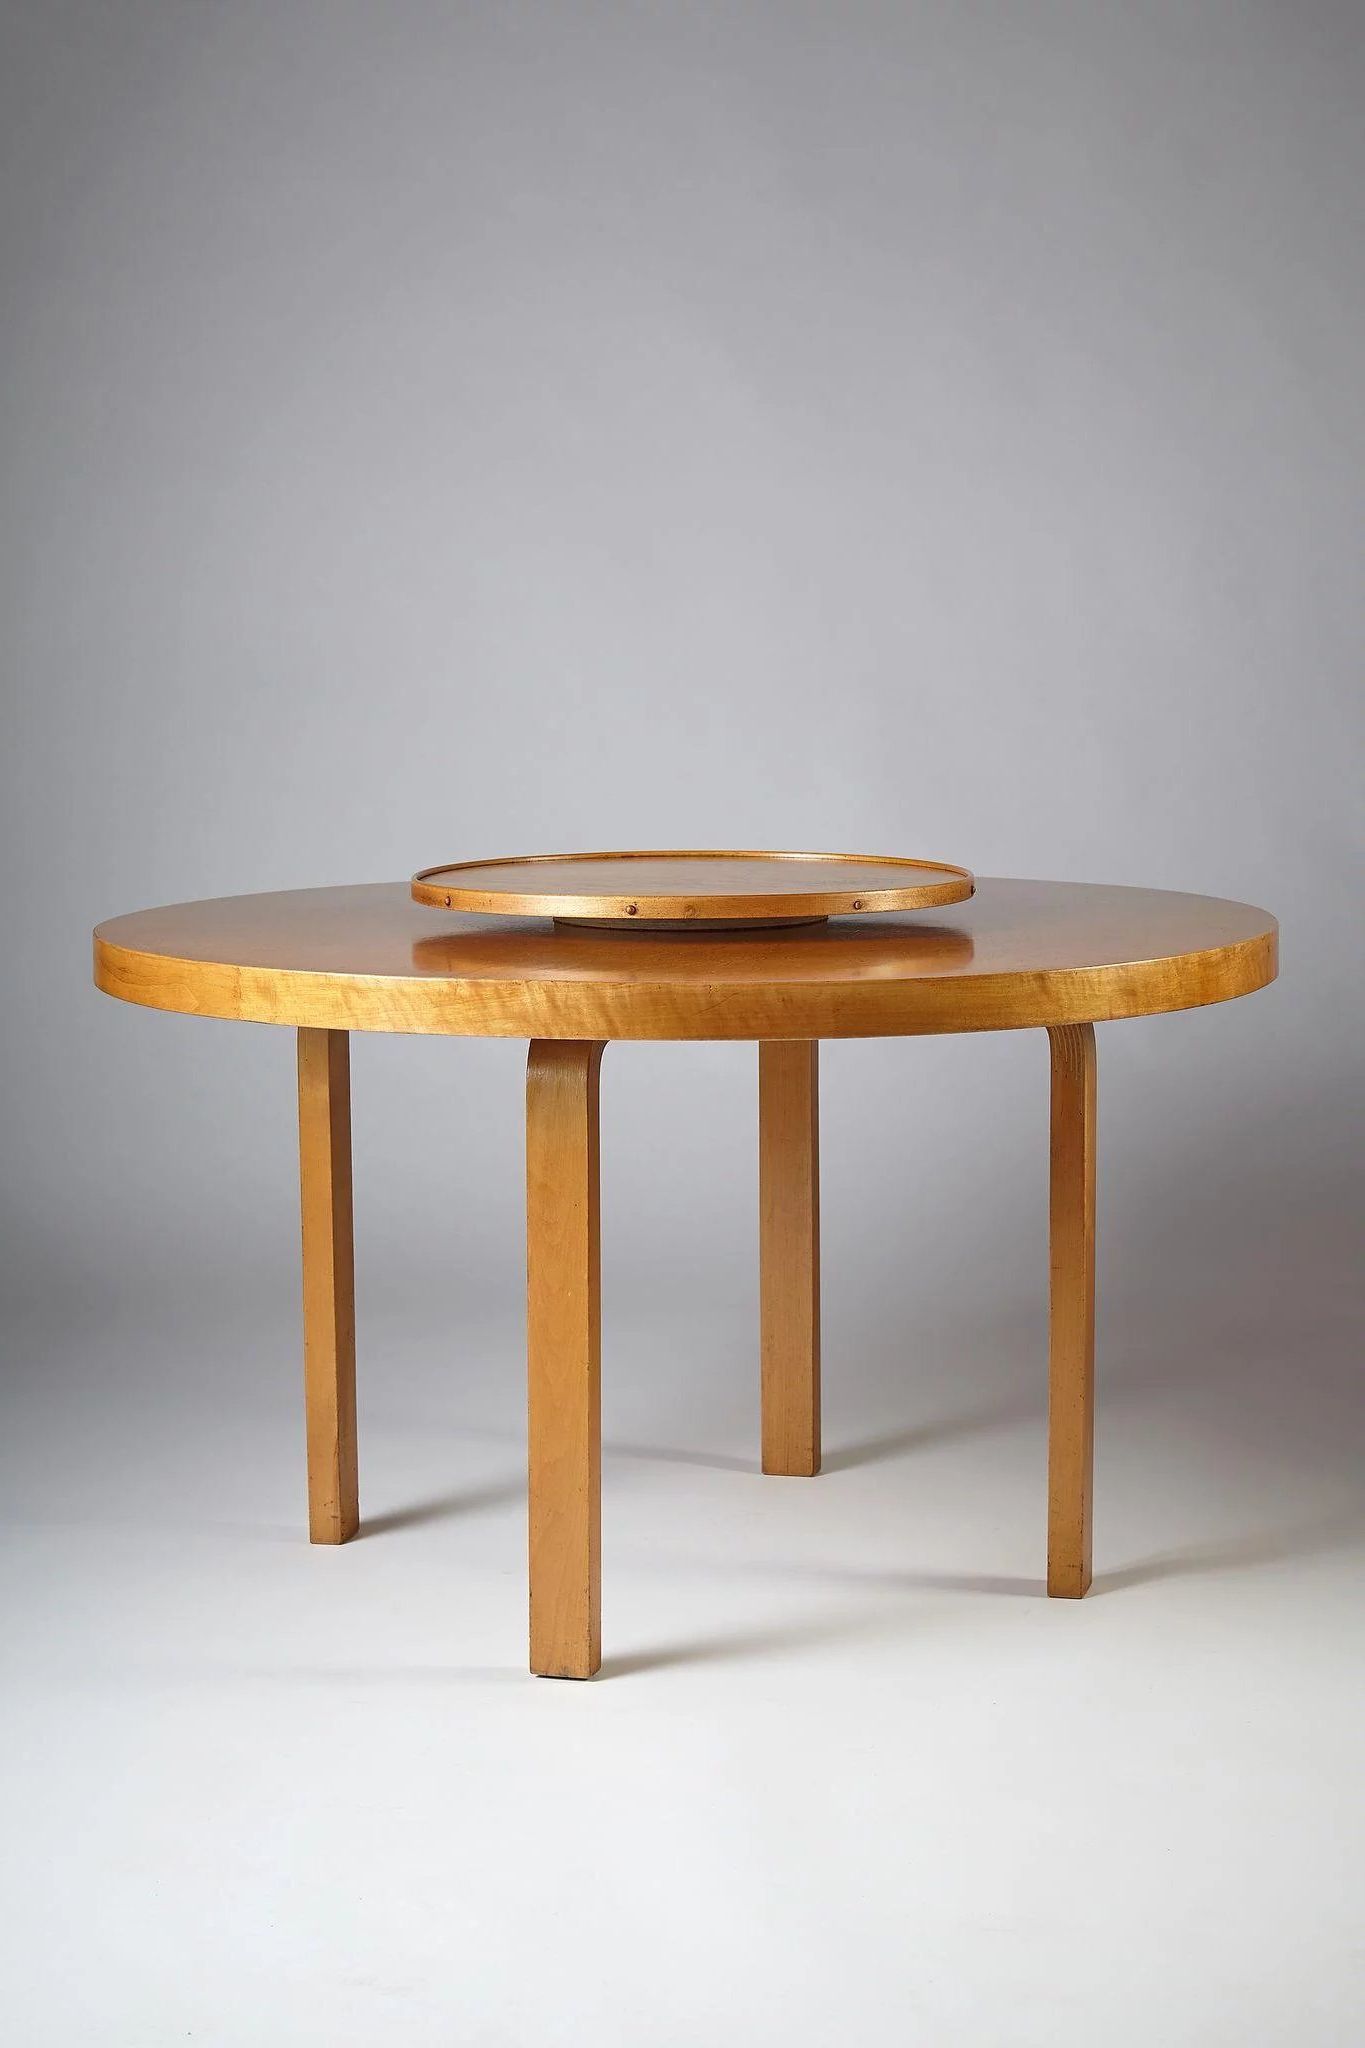 Dining Table With Carousel Designedalvar Aalto For Throughout Preferred Joyl  (View 3 of 20)